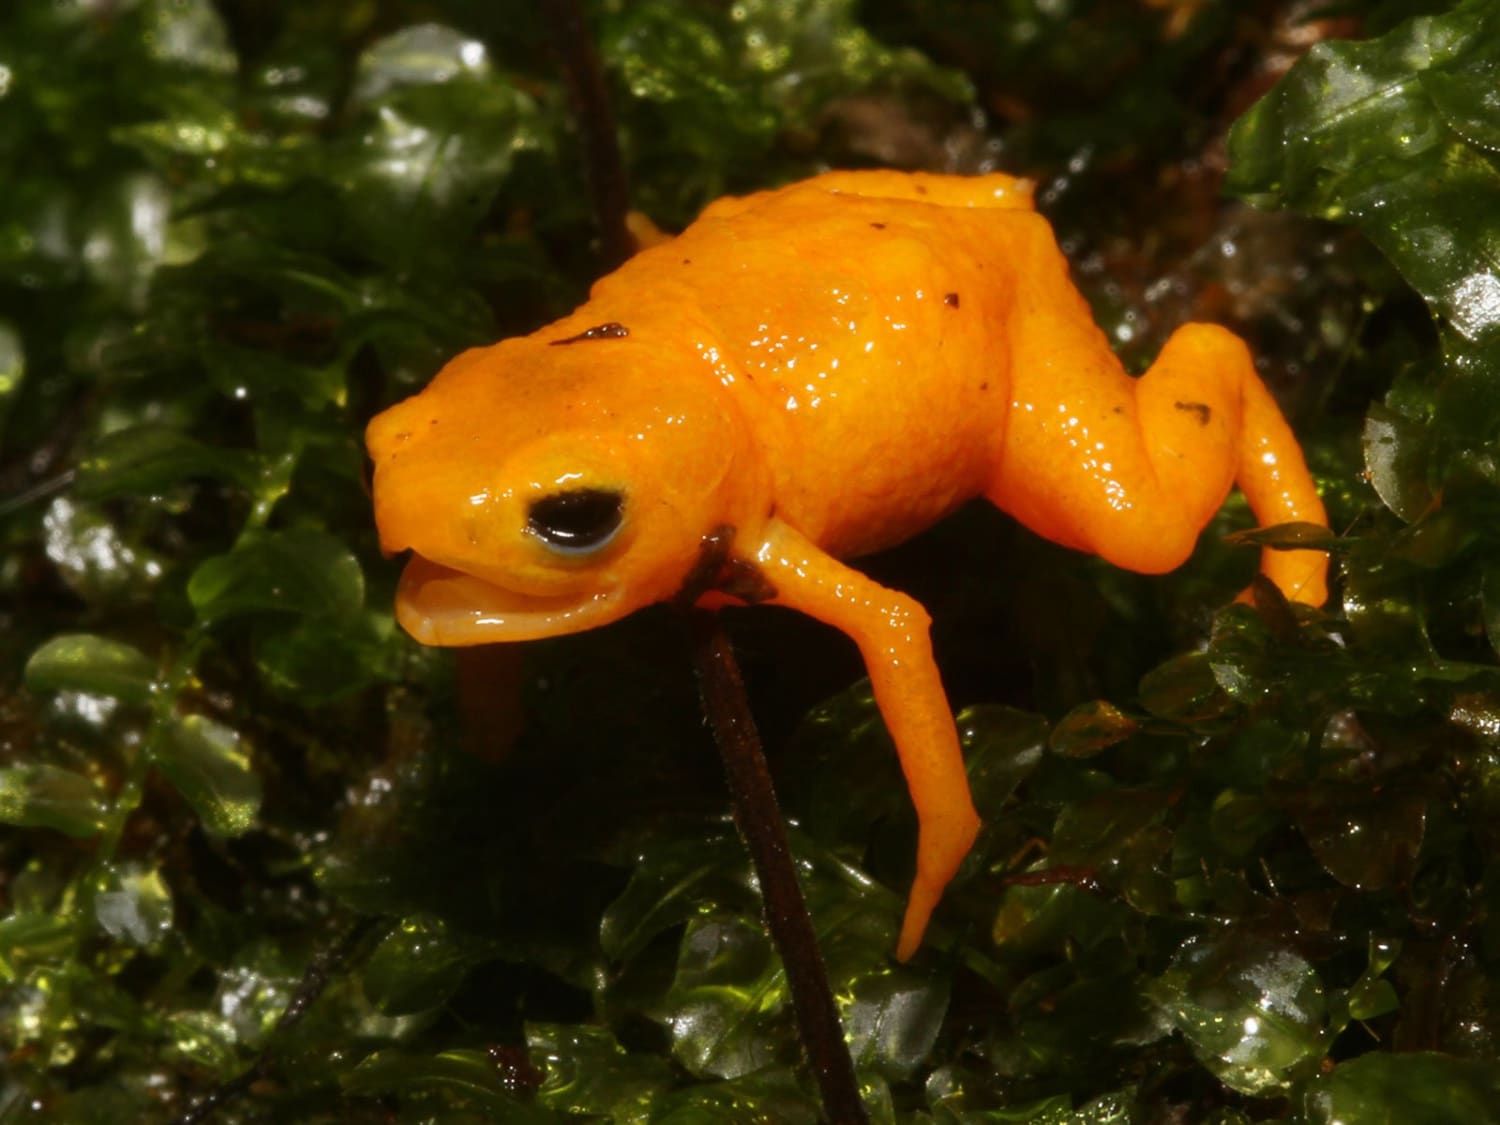 Biologists Discover New Species of Glowing Pumpkin Toadlet